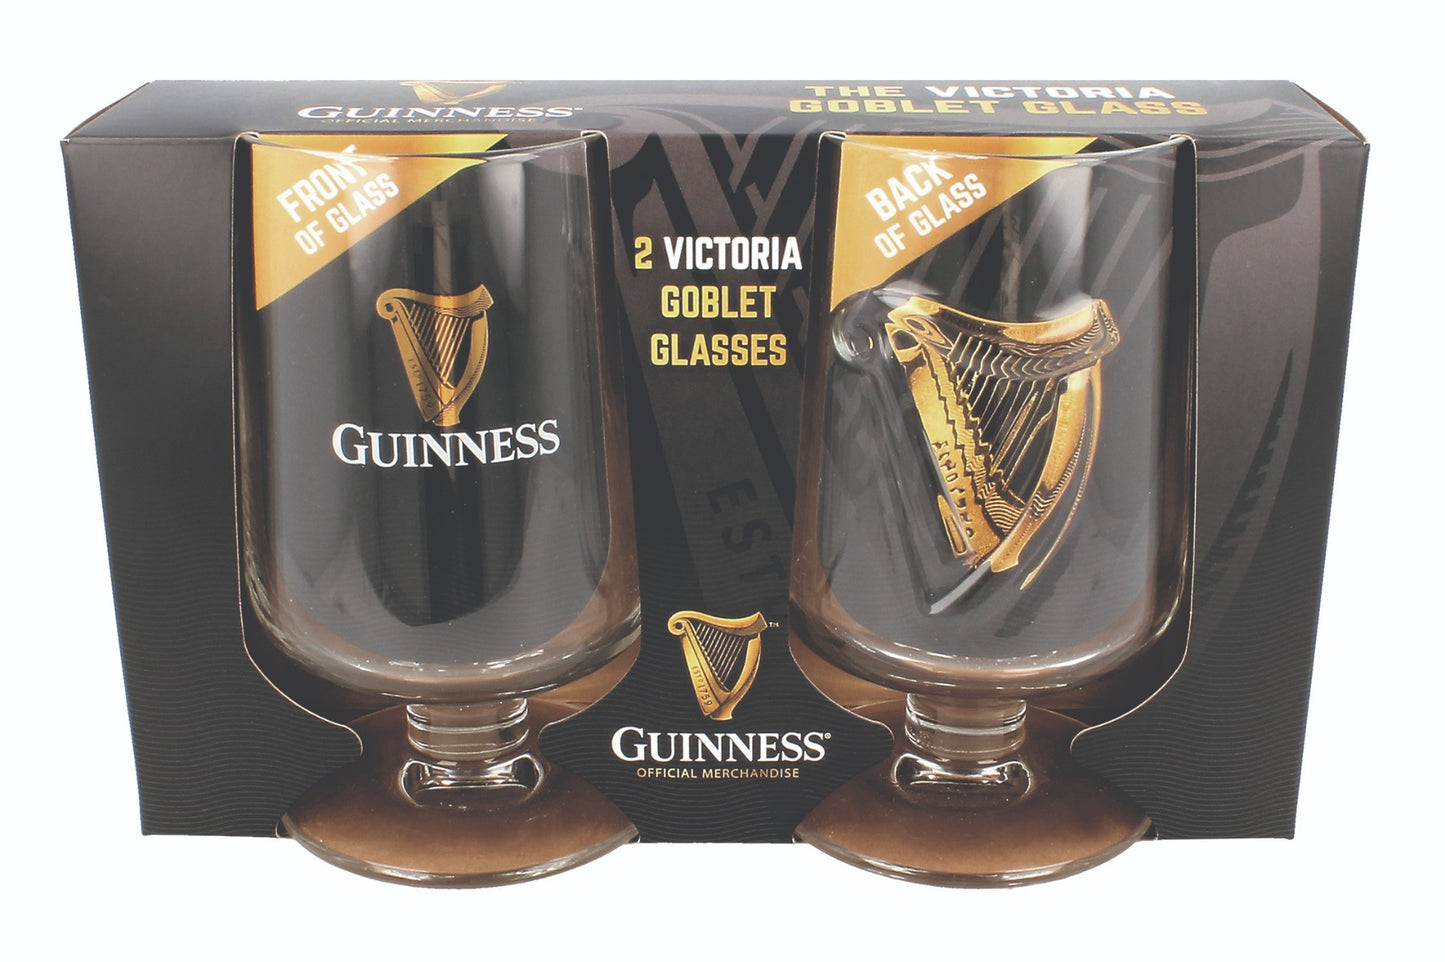 Two Guinness Embossed Stem Glass 2 Pack in a box.